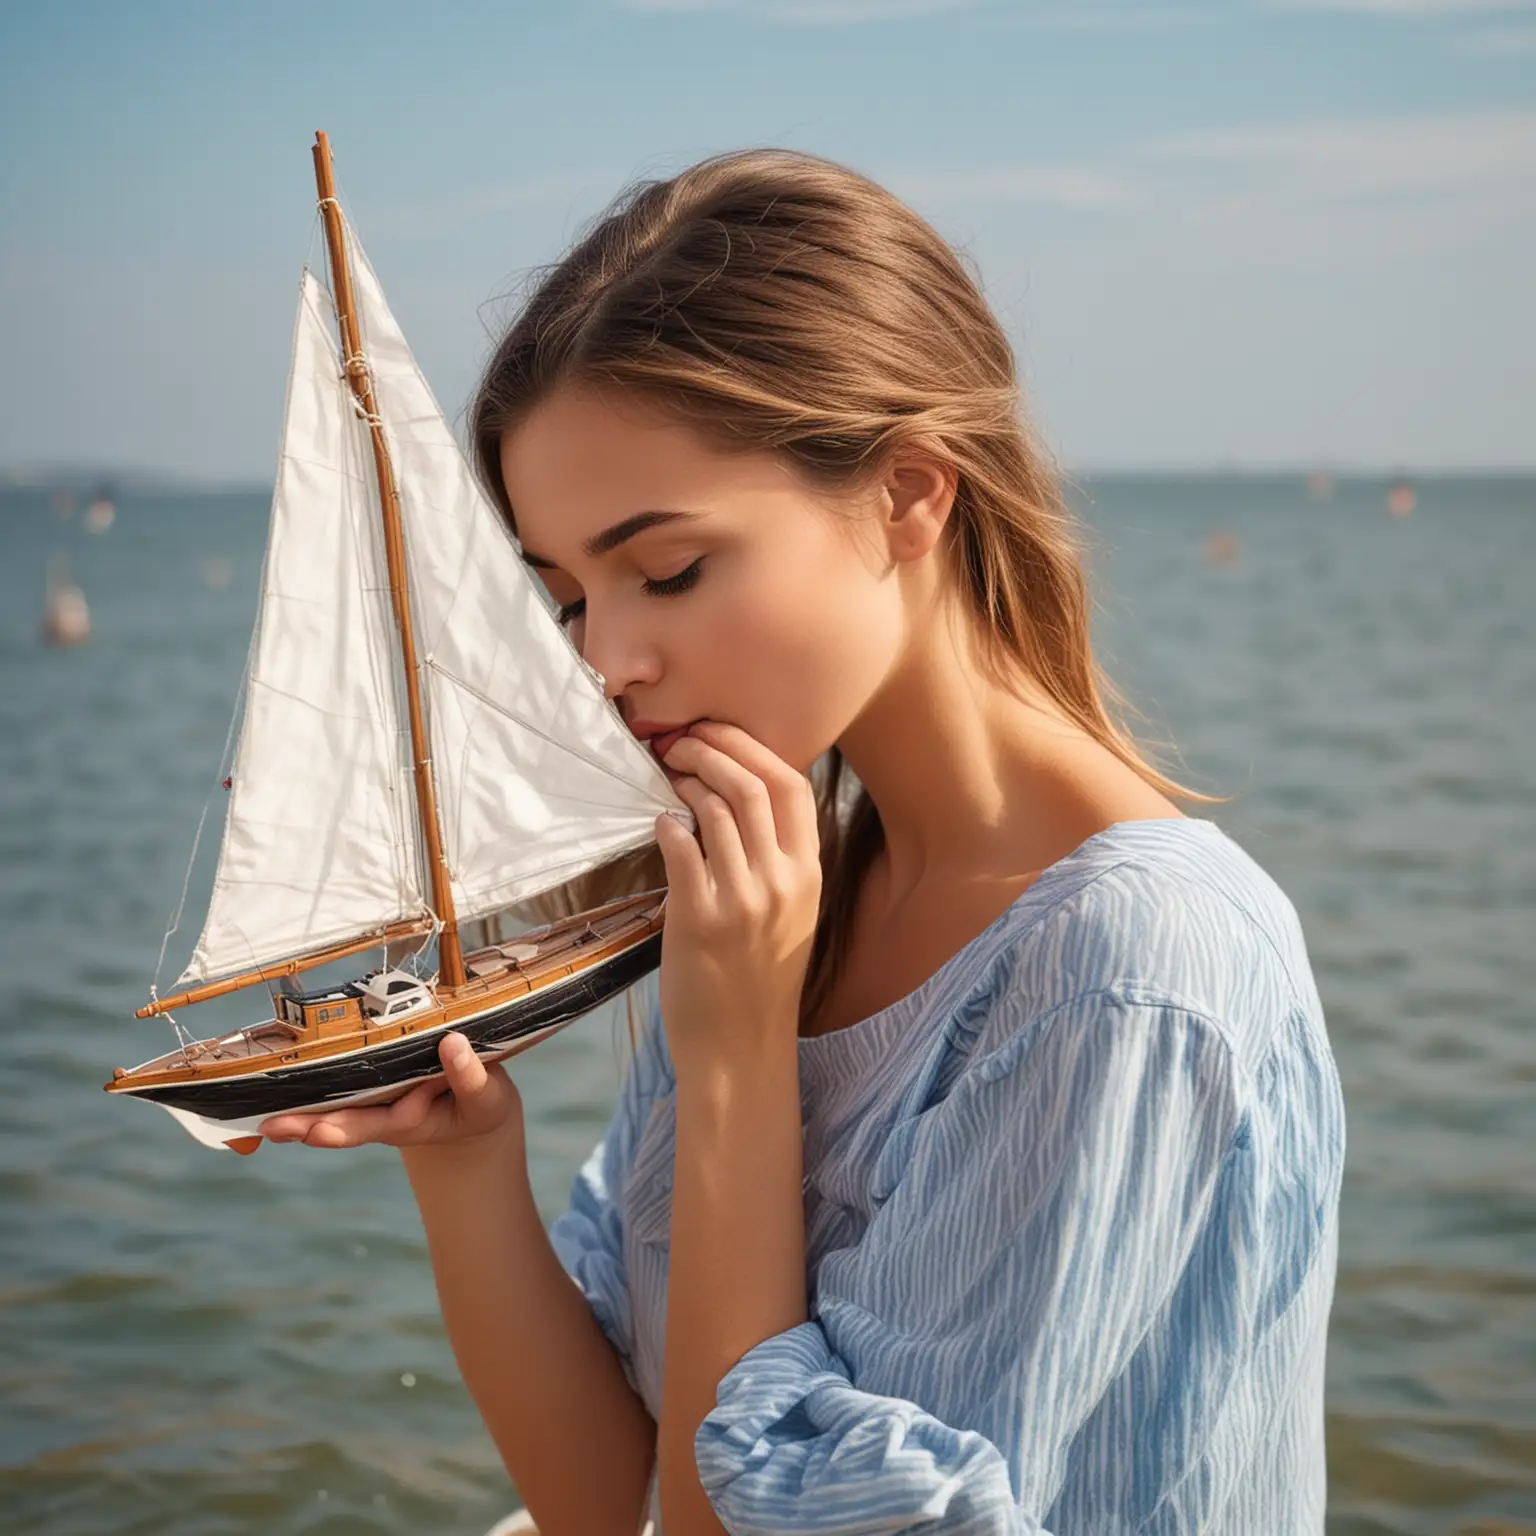 Adorable Child Embraces Miniature Sailboat with Affectionate Kiss